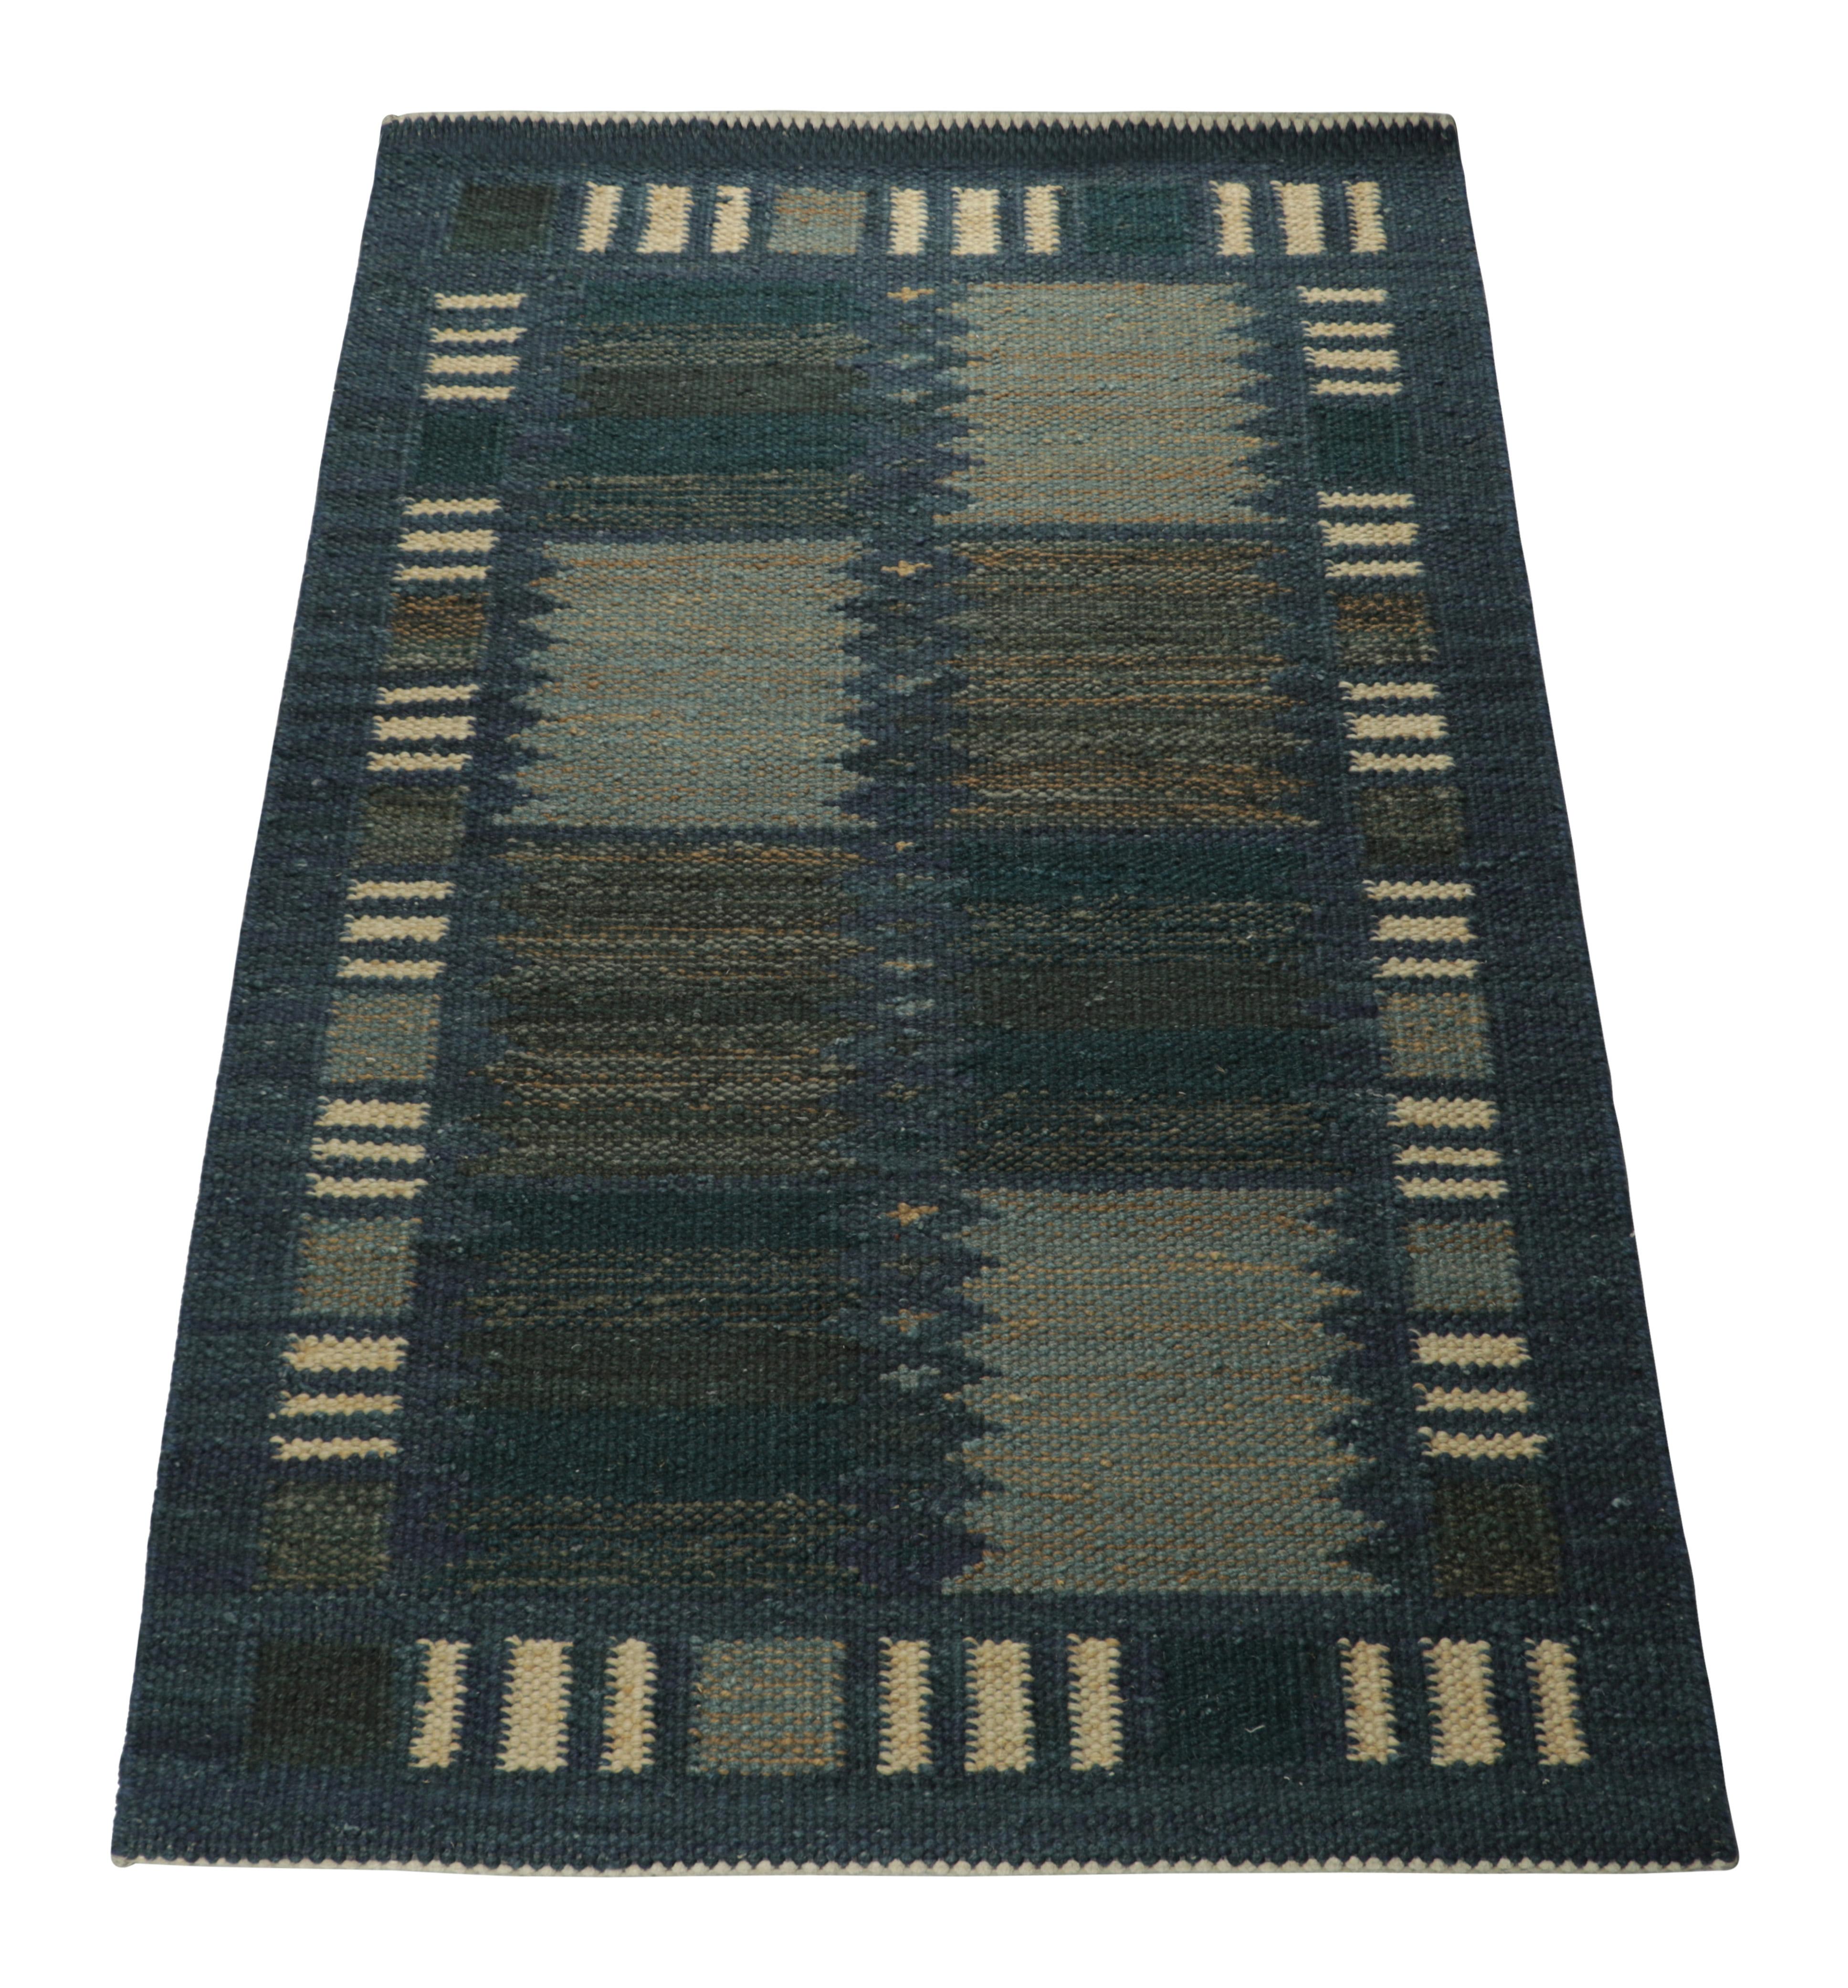 Indian Rug & Kilim’s Scandinavian Style Rug in Blue Tones, with Geometric Stripes For Sale